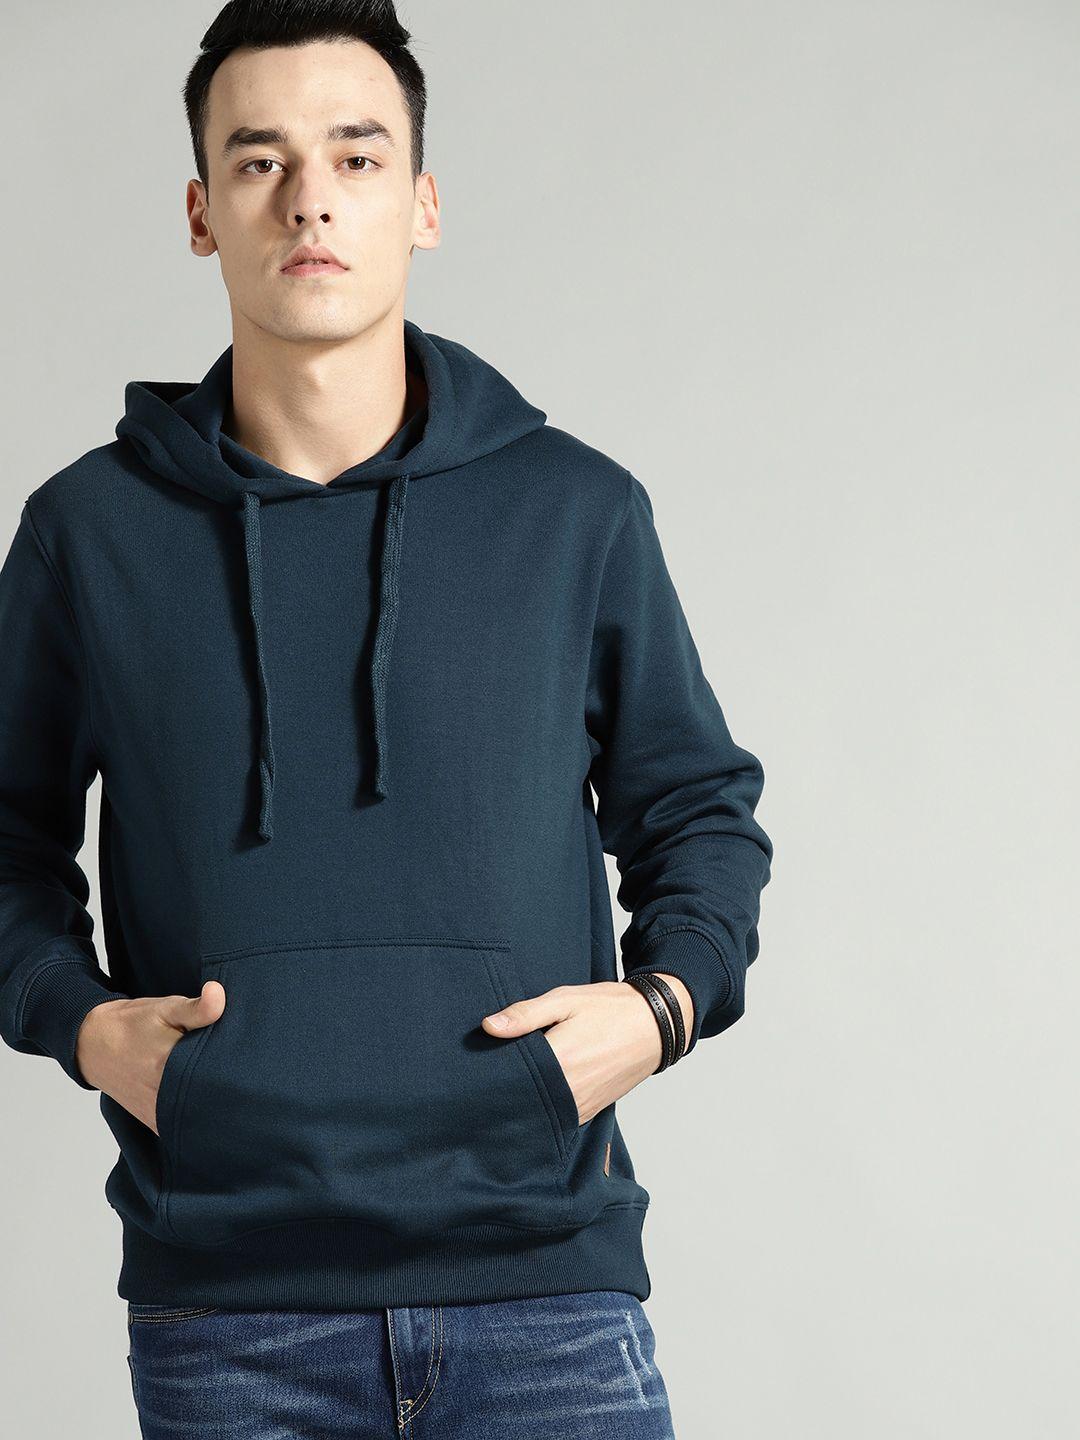 the-roadster-lifestyle-co-men-navy-blue-solid-hooded-sweatshirt